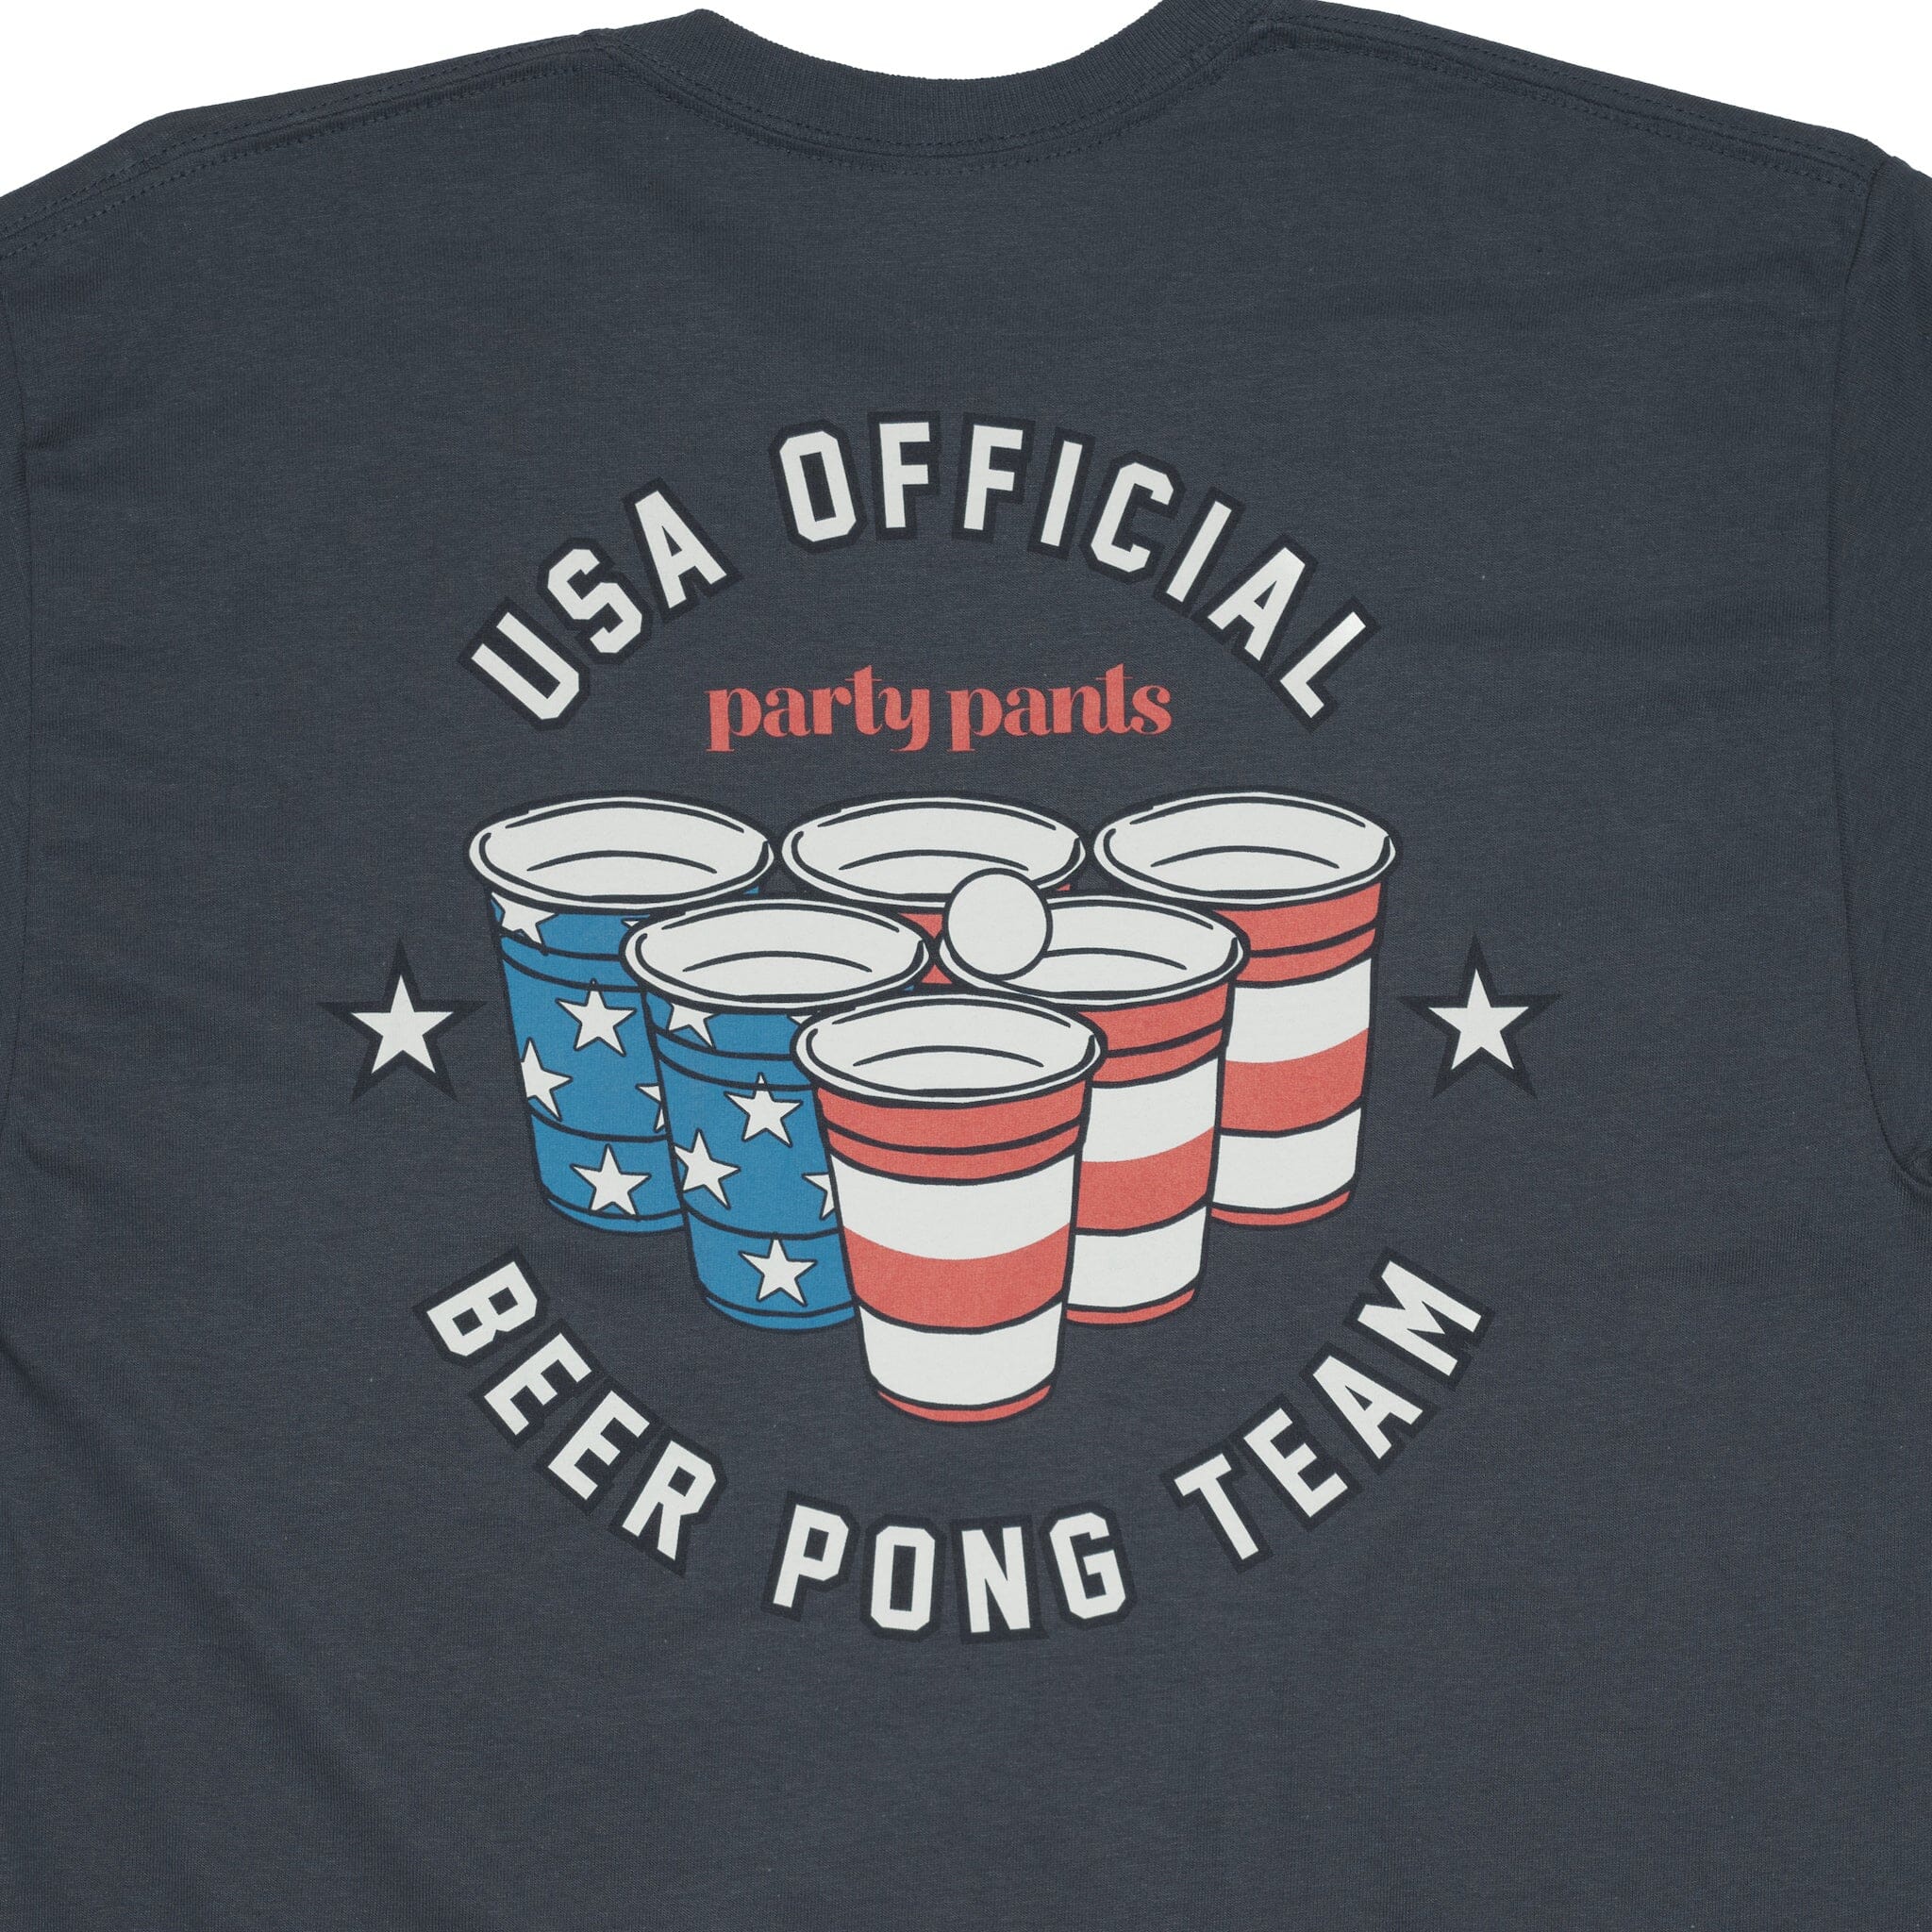 BEER PONG TEAM T-SHIRT - BLUE DUSK TEE PARTY PANTS 